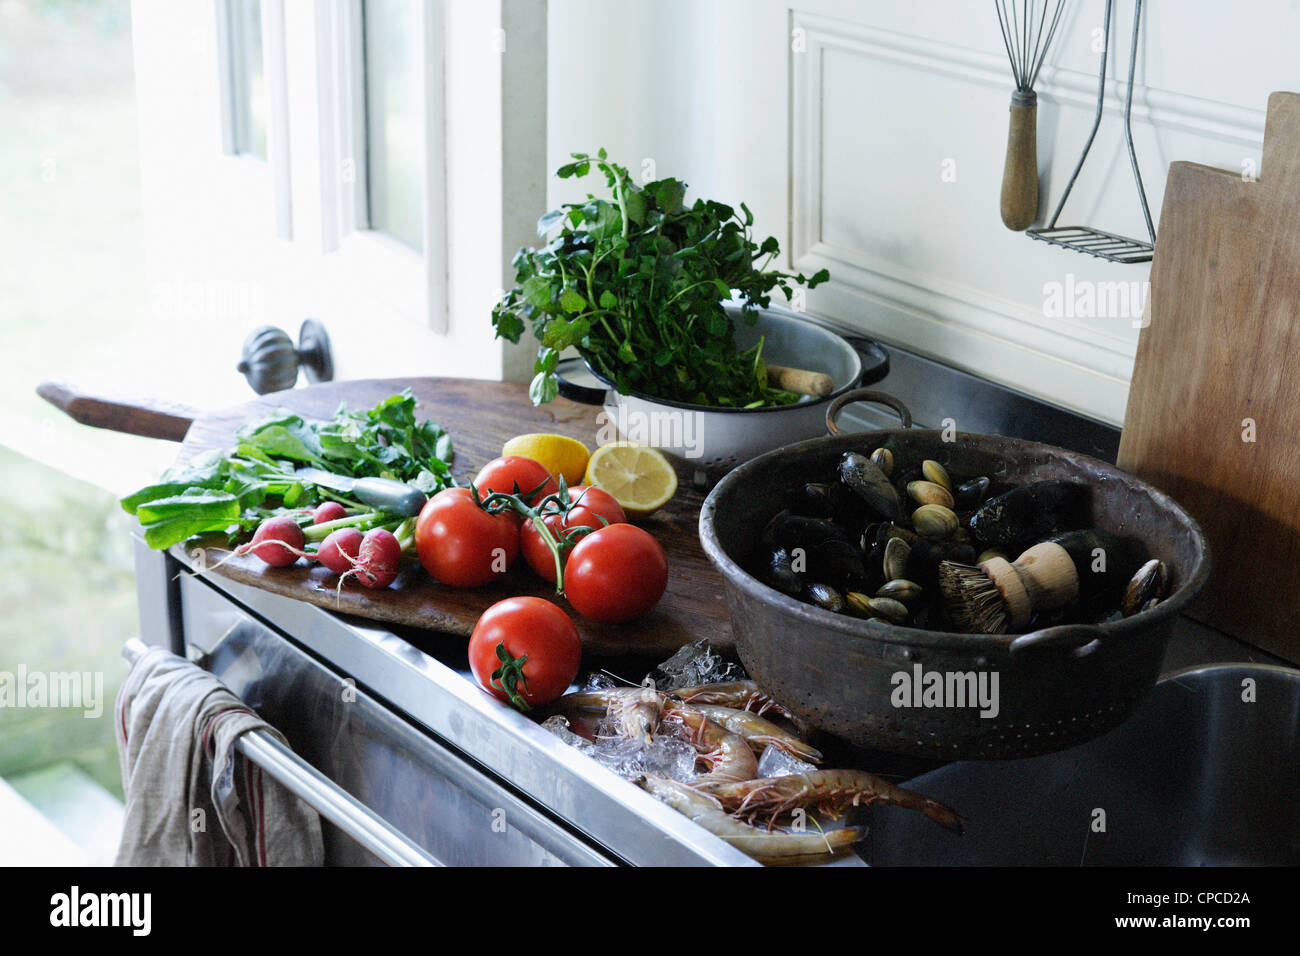 Seafood and produce on kitchen counter Stock Photo